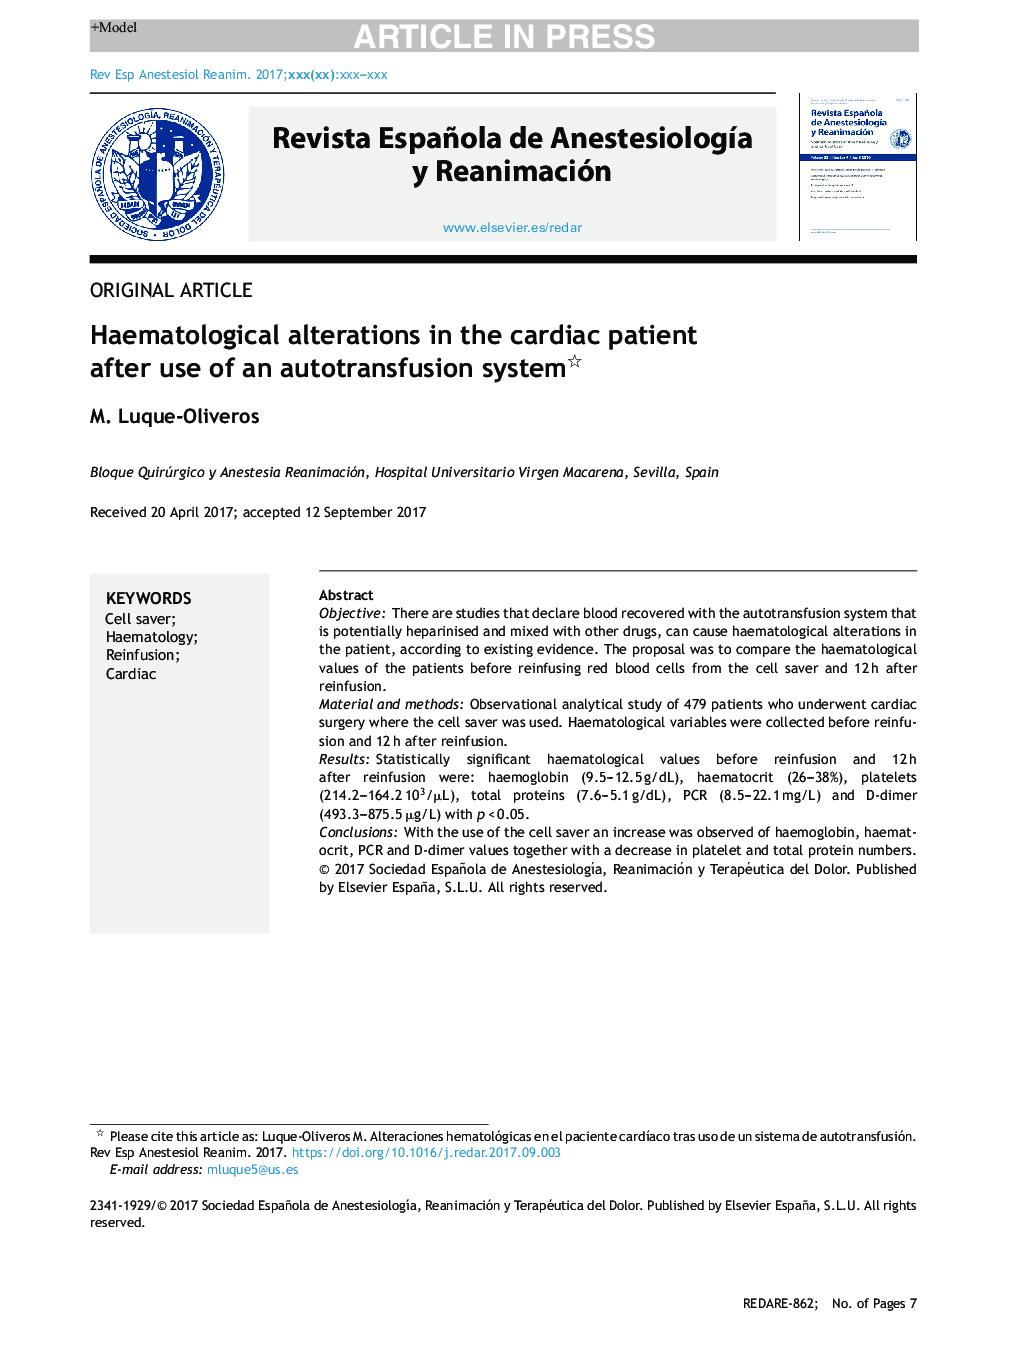 Haematological alterations in the cardiac patient after use of an autotransfusion system